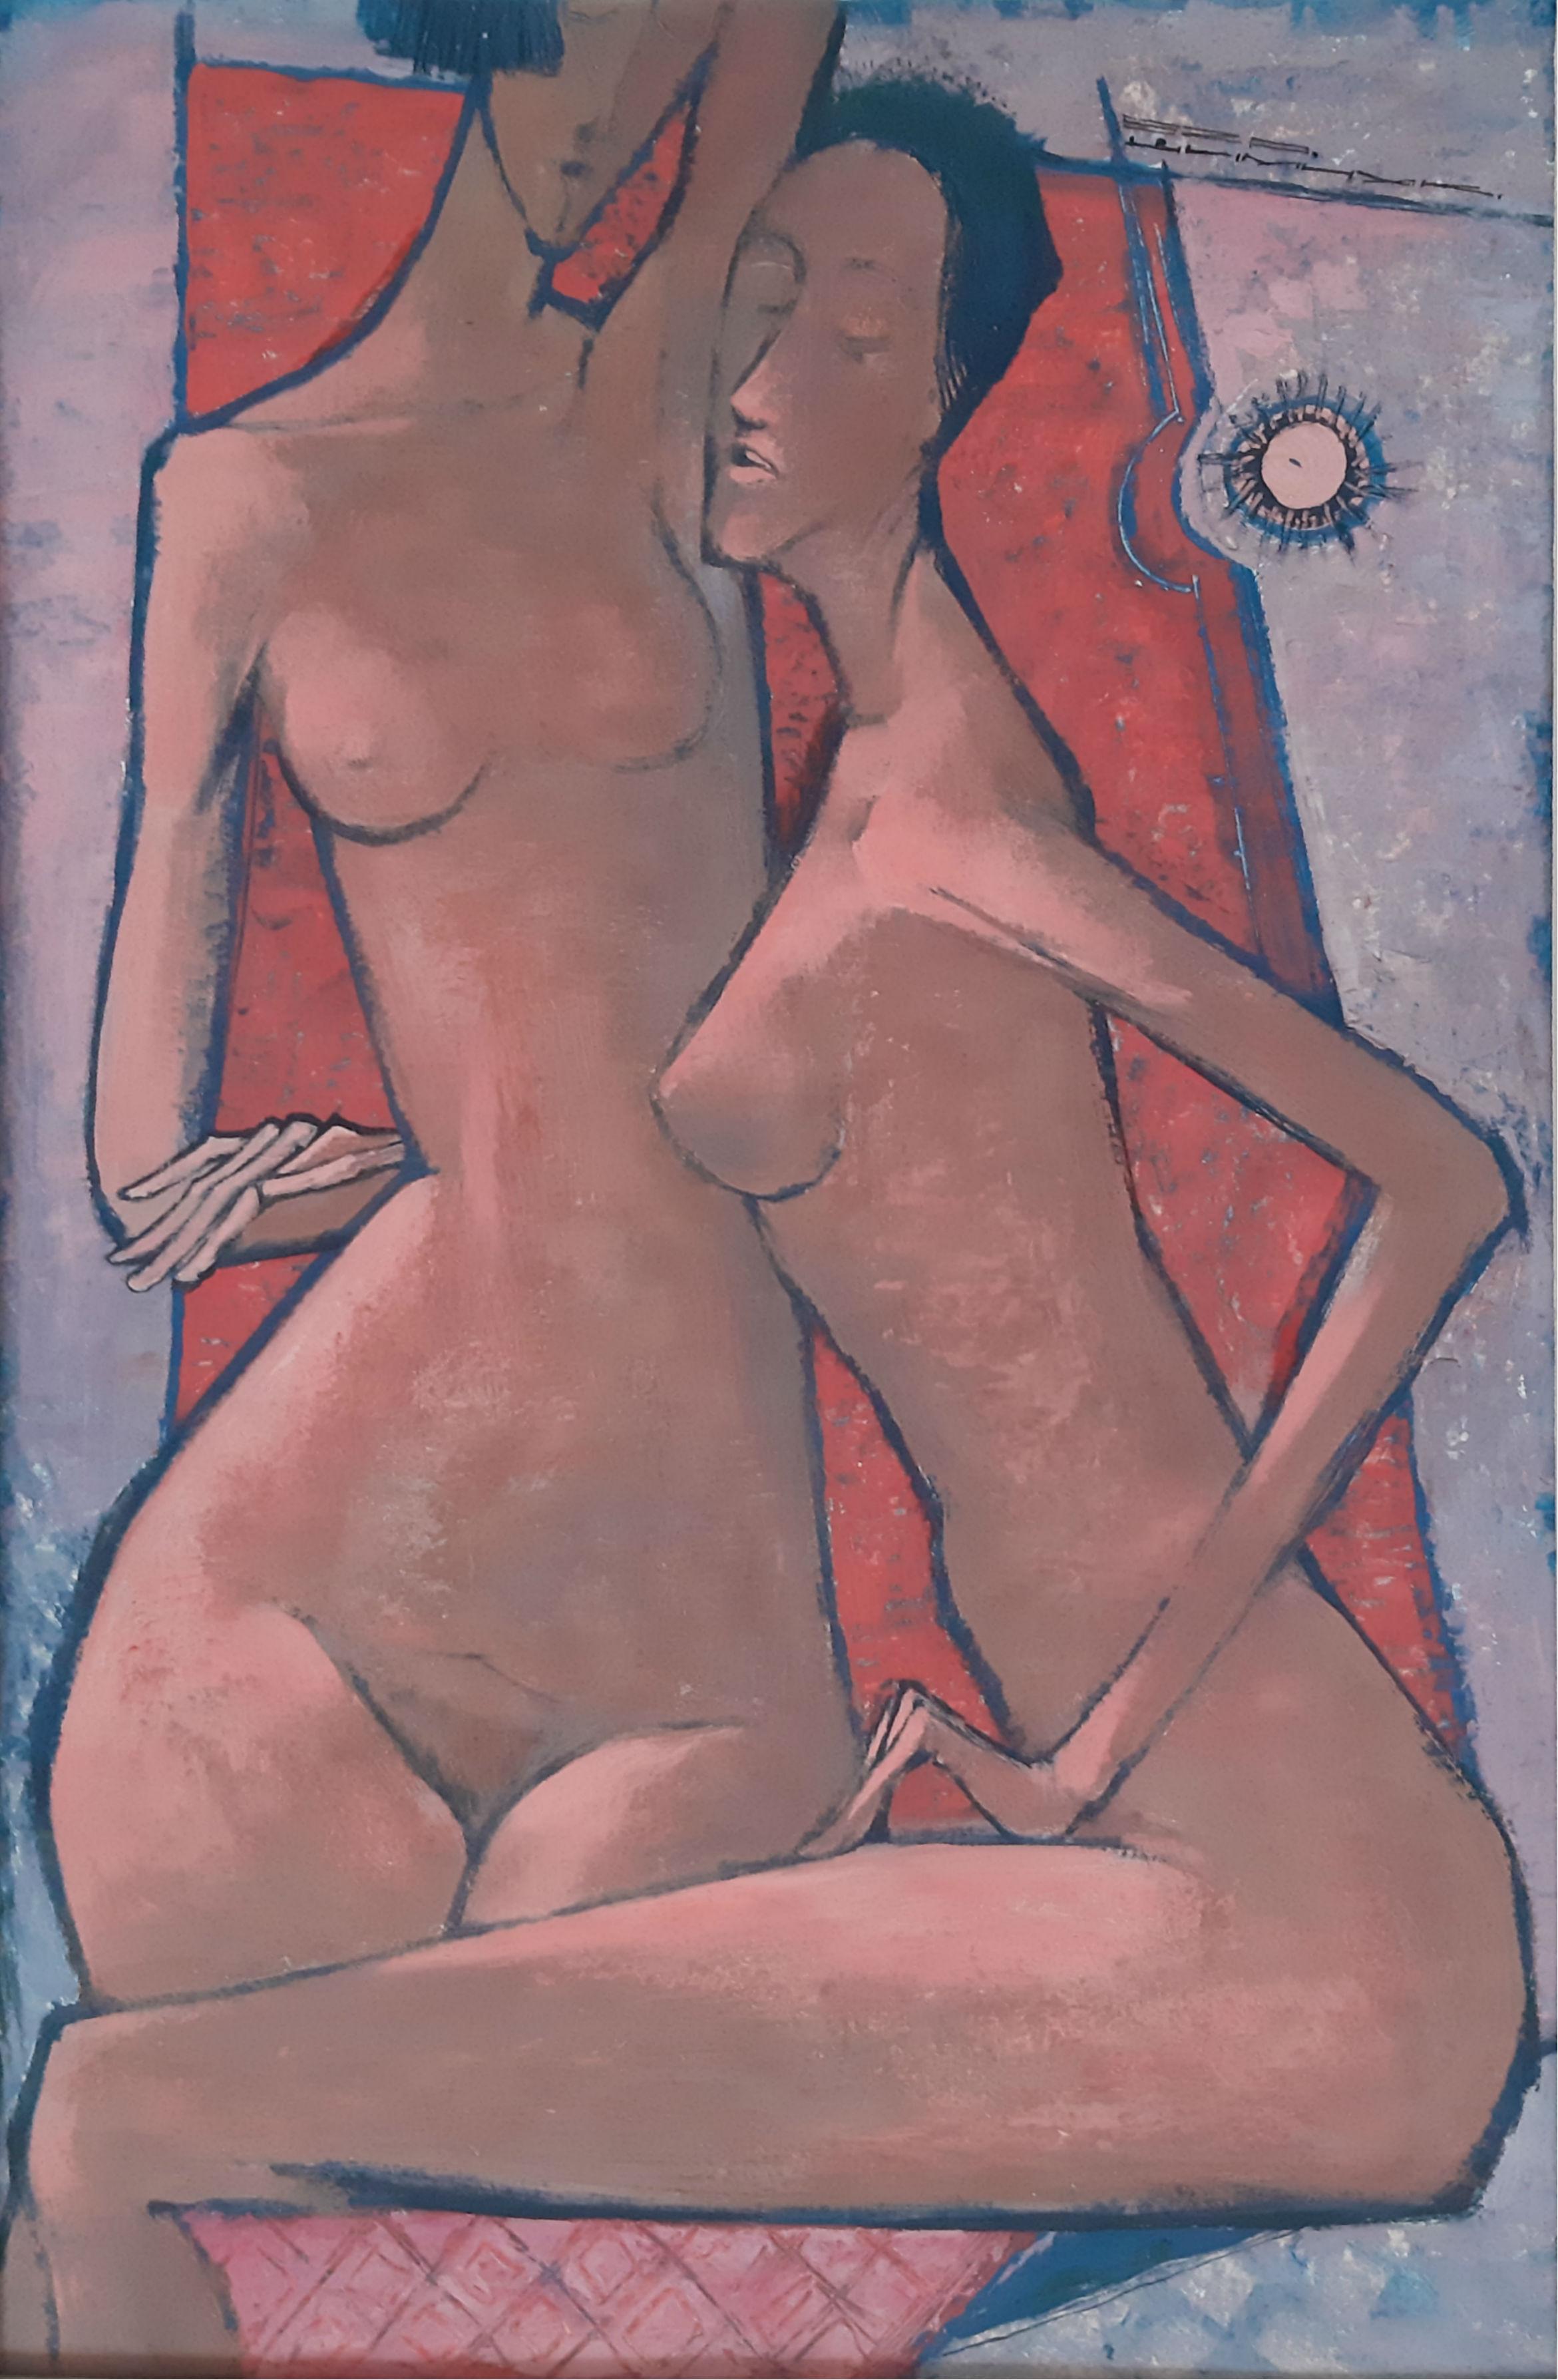 Eza Szymczuk Nude Painting - Nudes - XX Century, Contemporary Figurative Own Technique on Board Painting